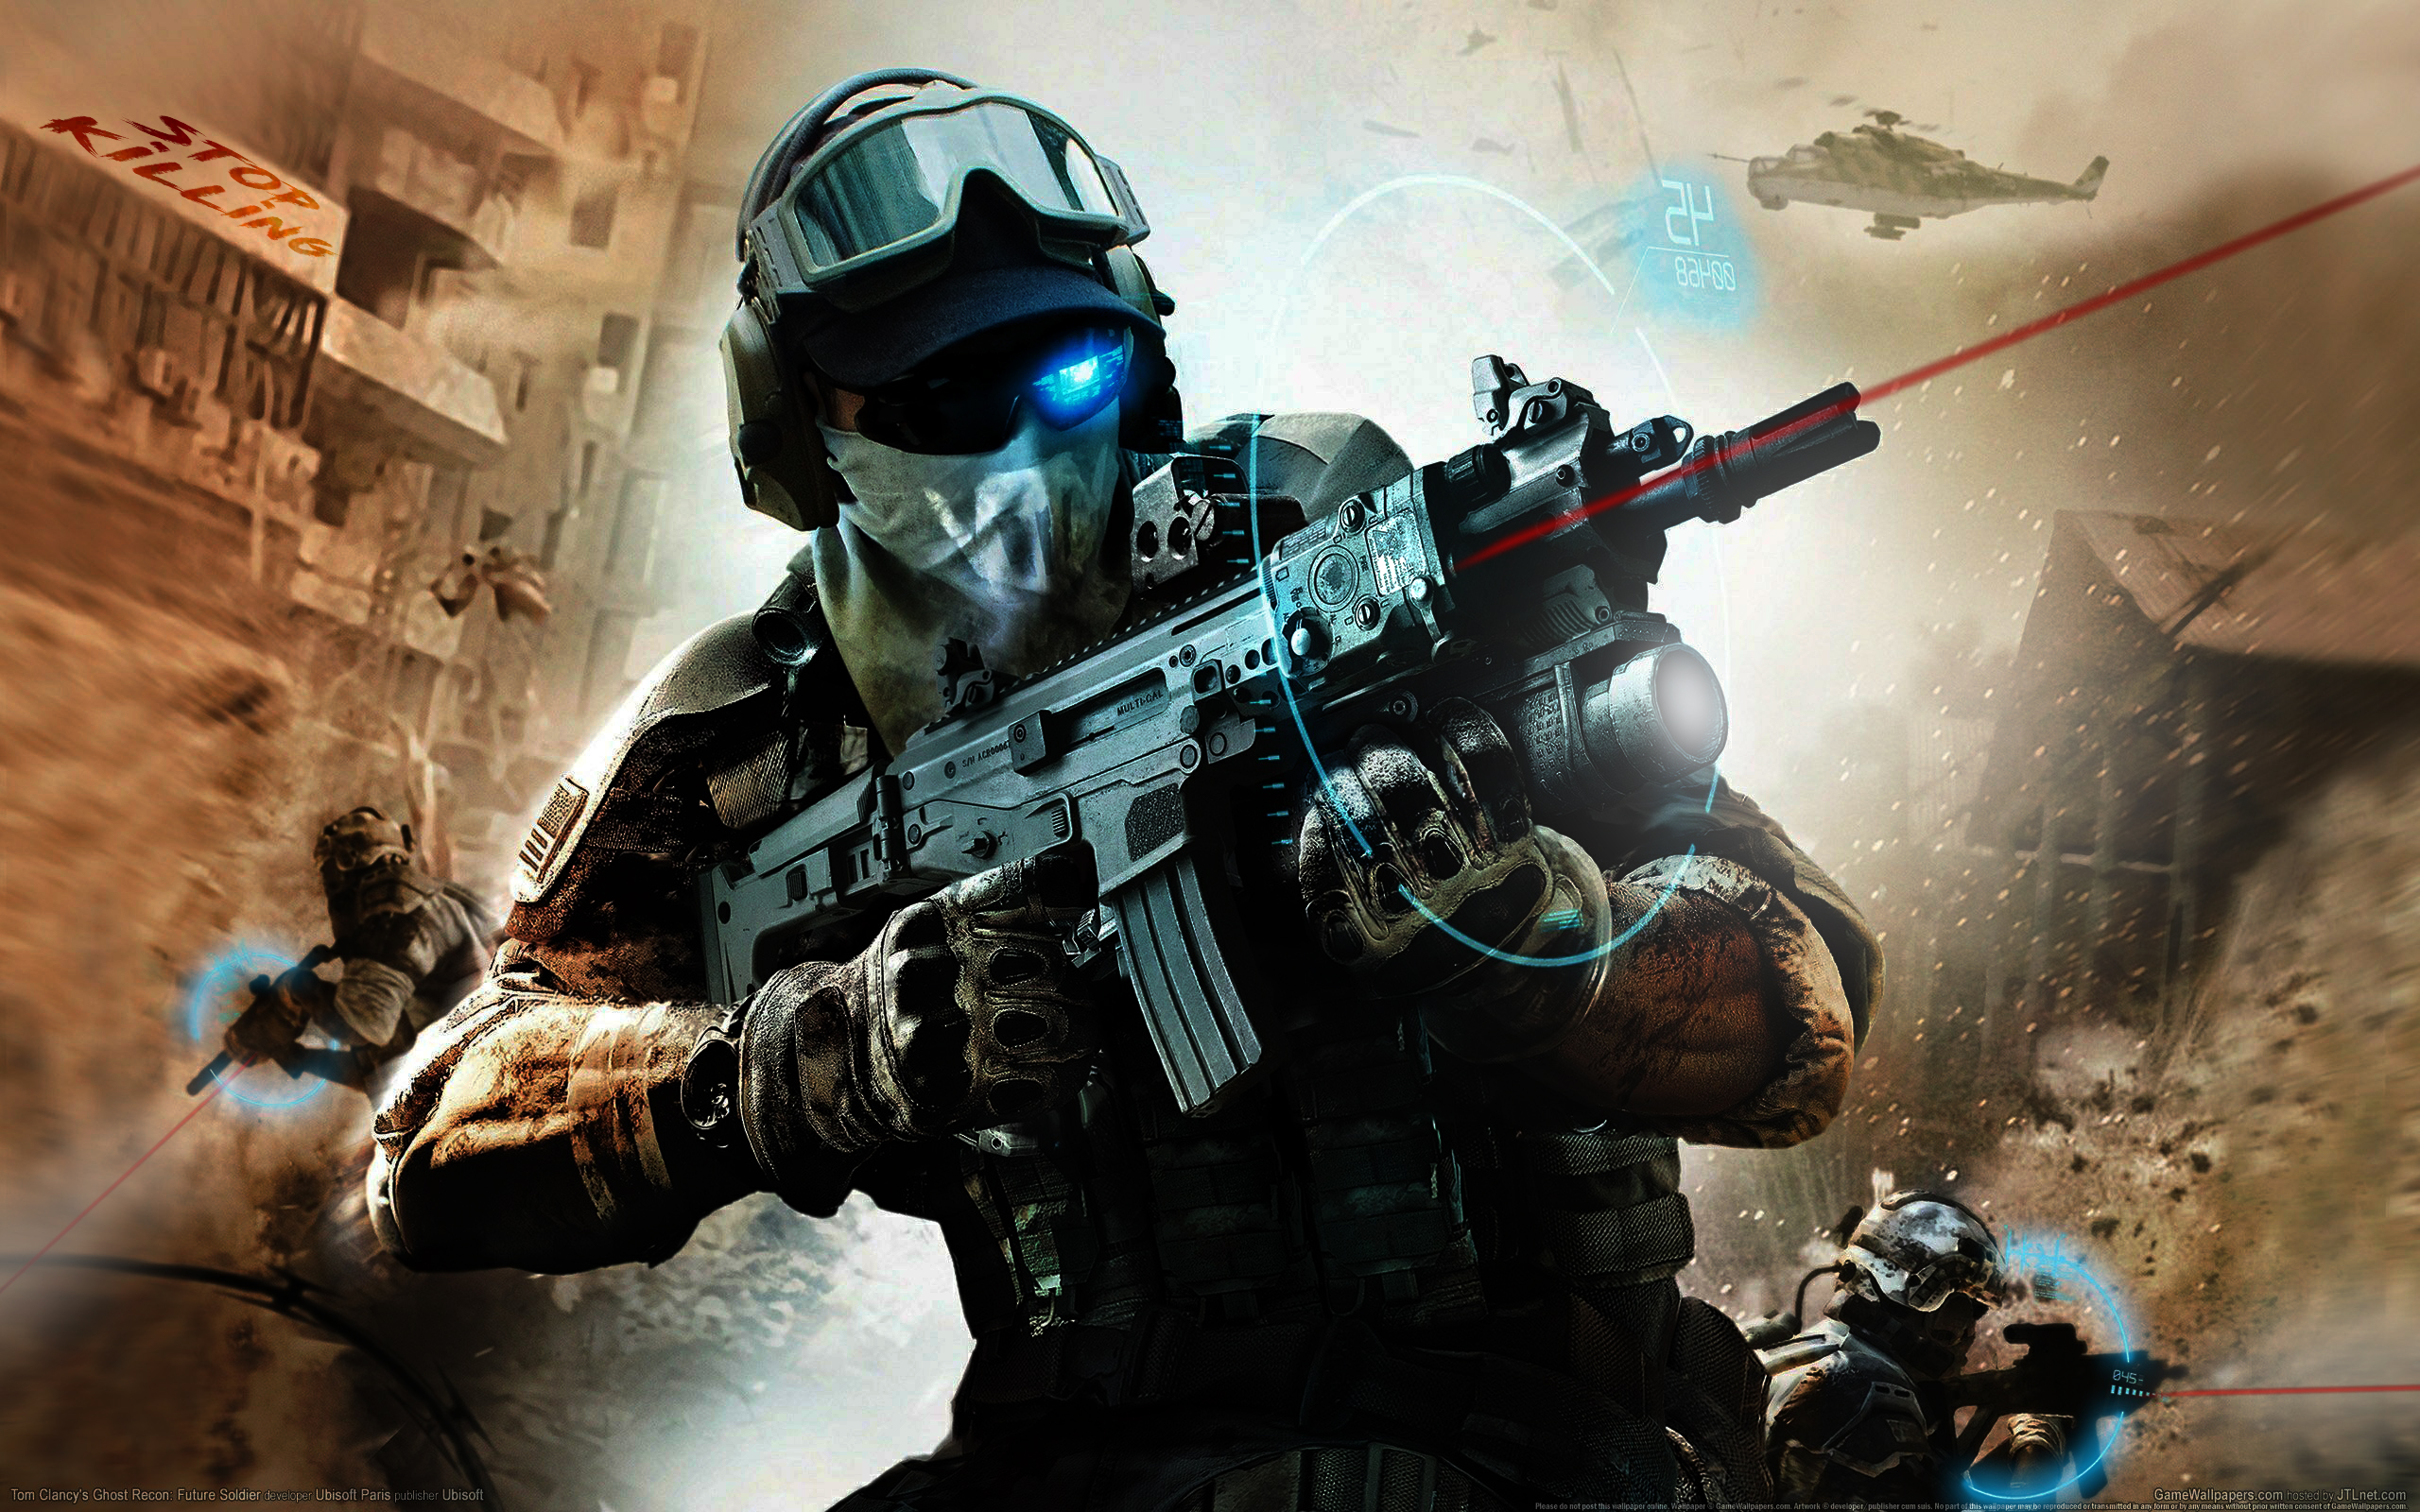 General 2560x1600 Tom Clancy's Ghost Recon: Future Soldier video games weapon PC gaming soldier military